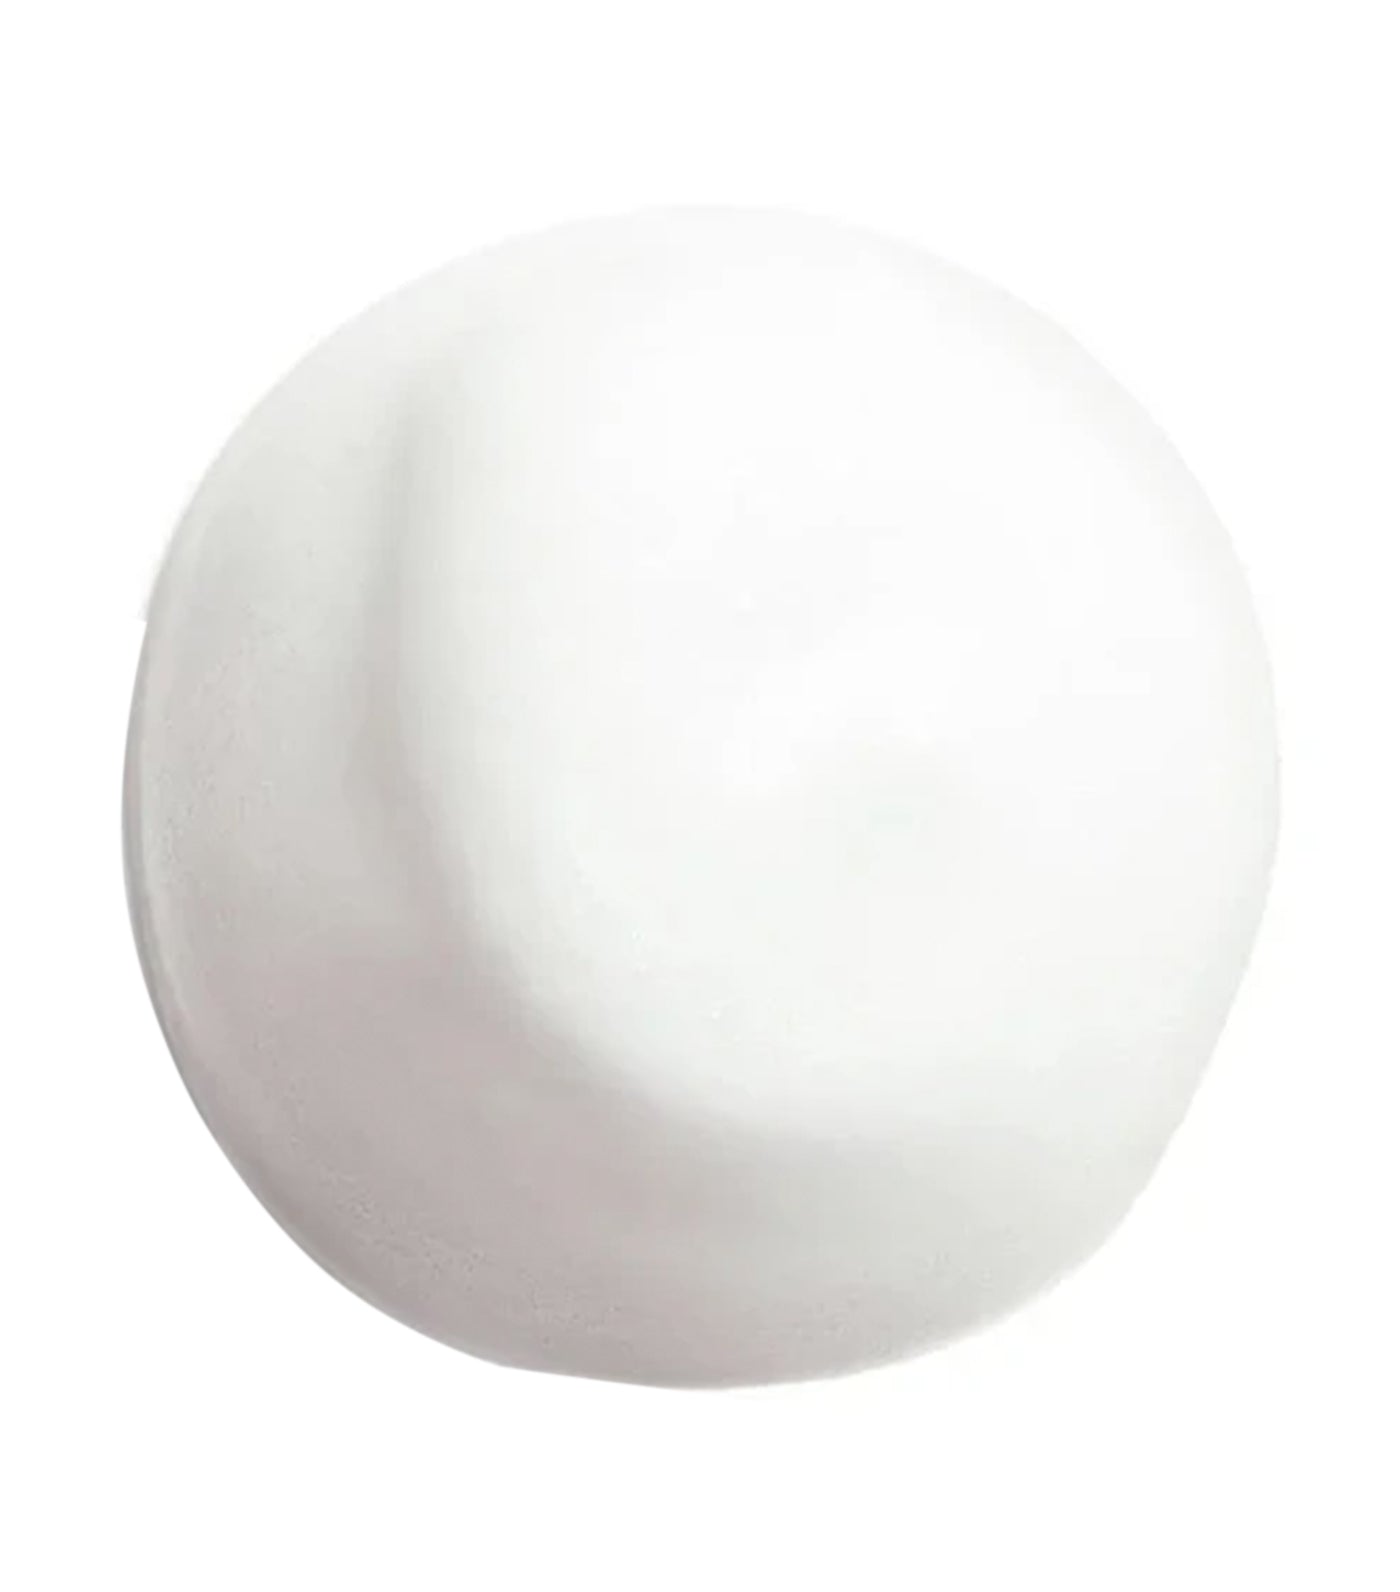 shiseido complete cleansing microfoam